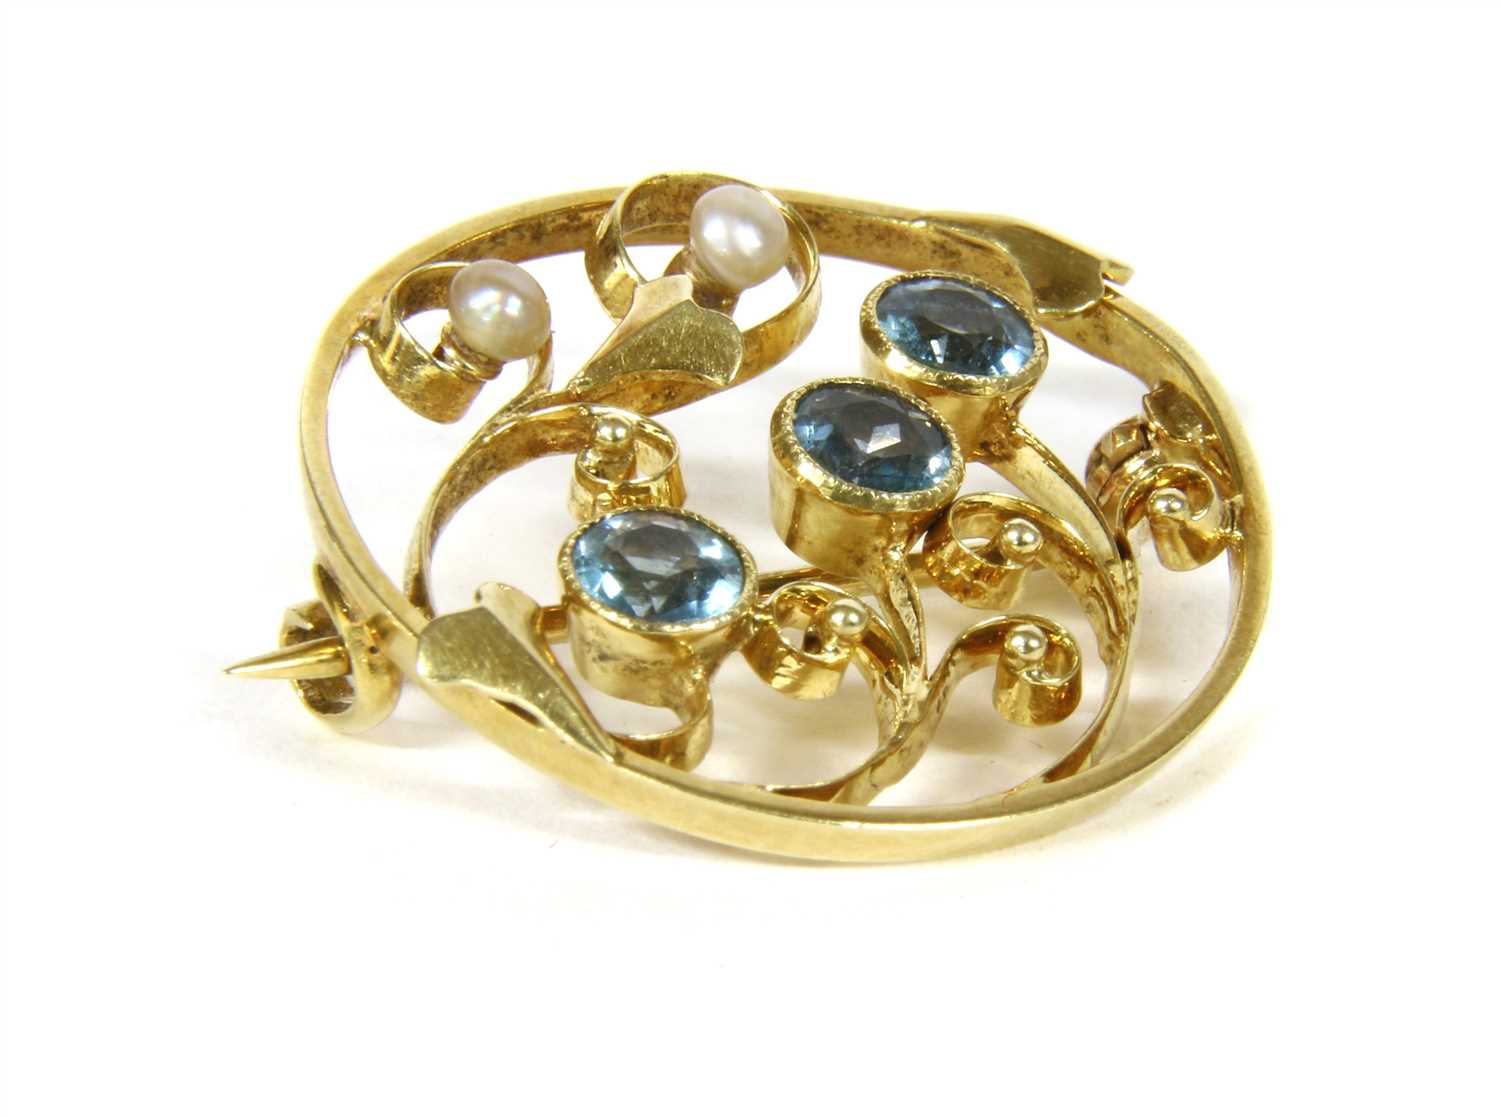 Lot 23 - An Edwardian gold aquamarine and seed pearl brooch